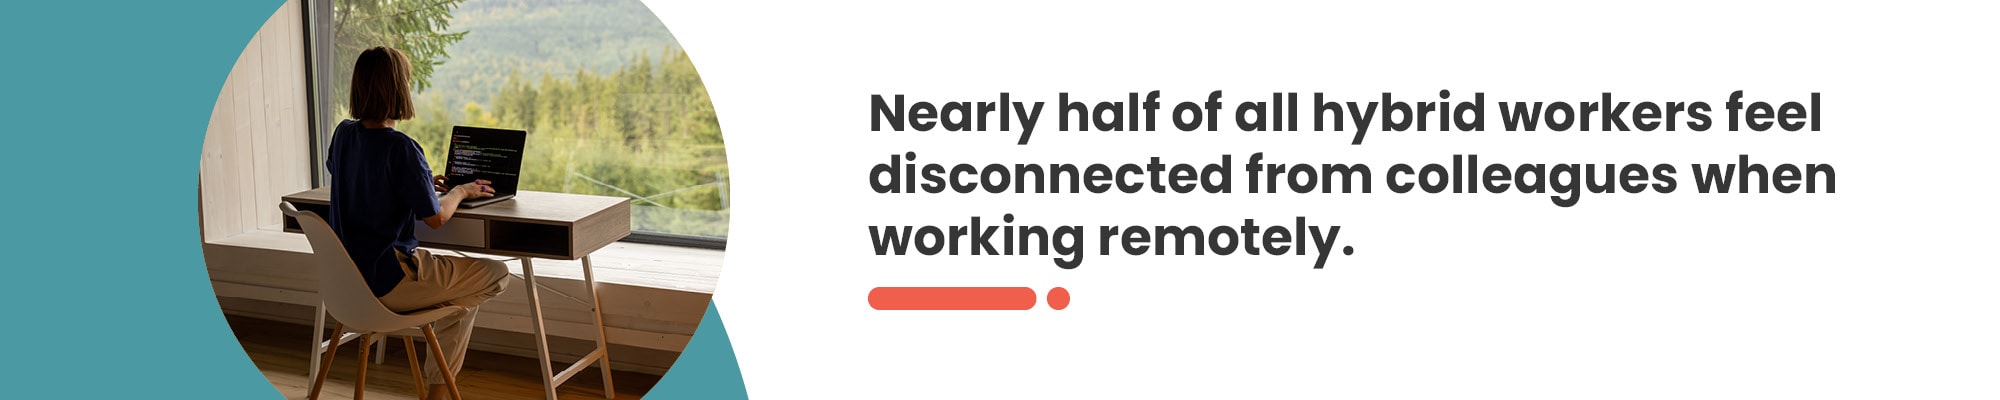 Nearly half of all hybrid workers feel disconnected from colleagues.